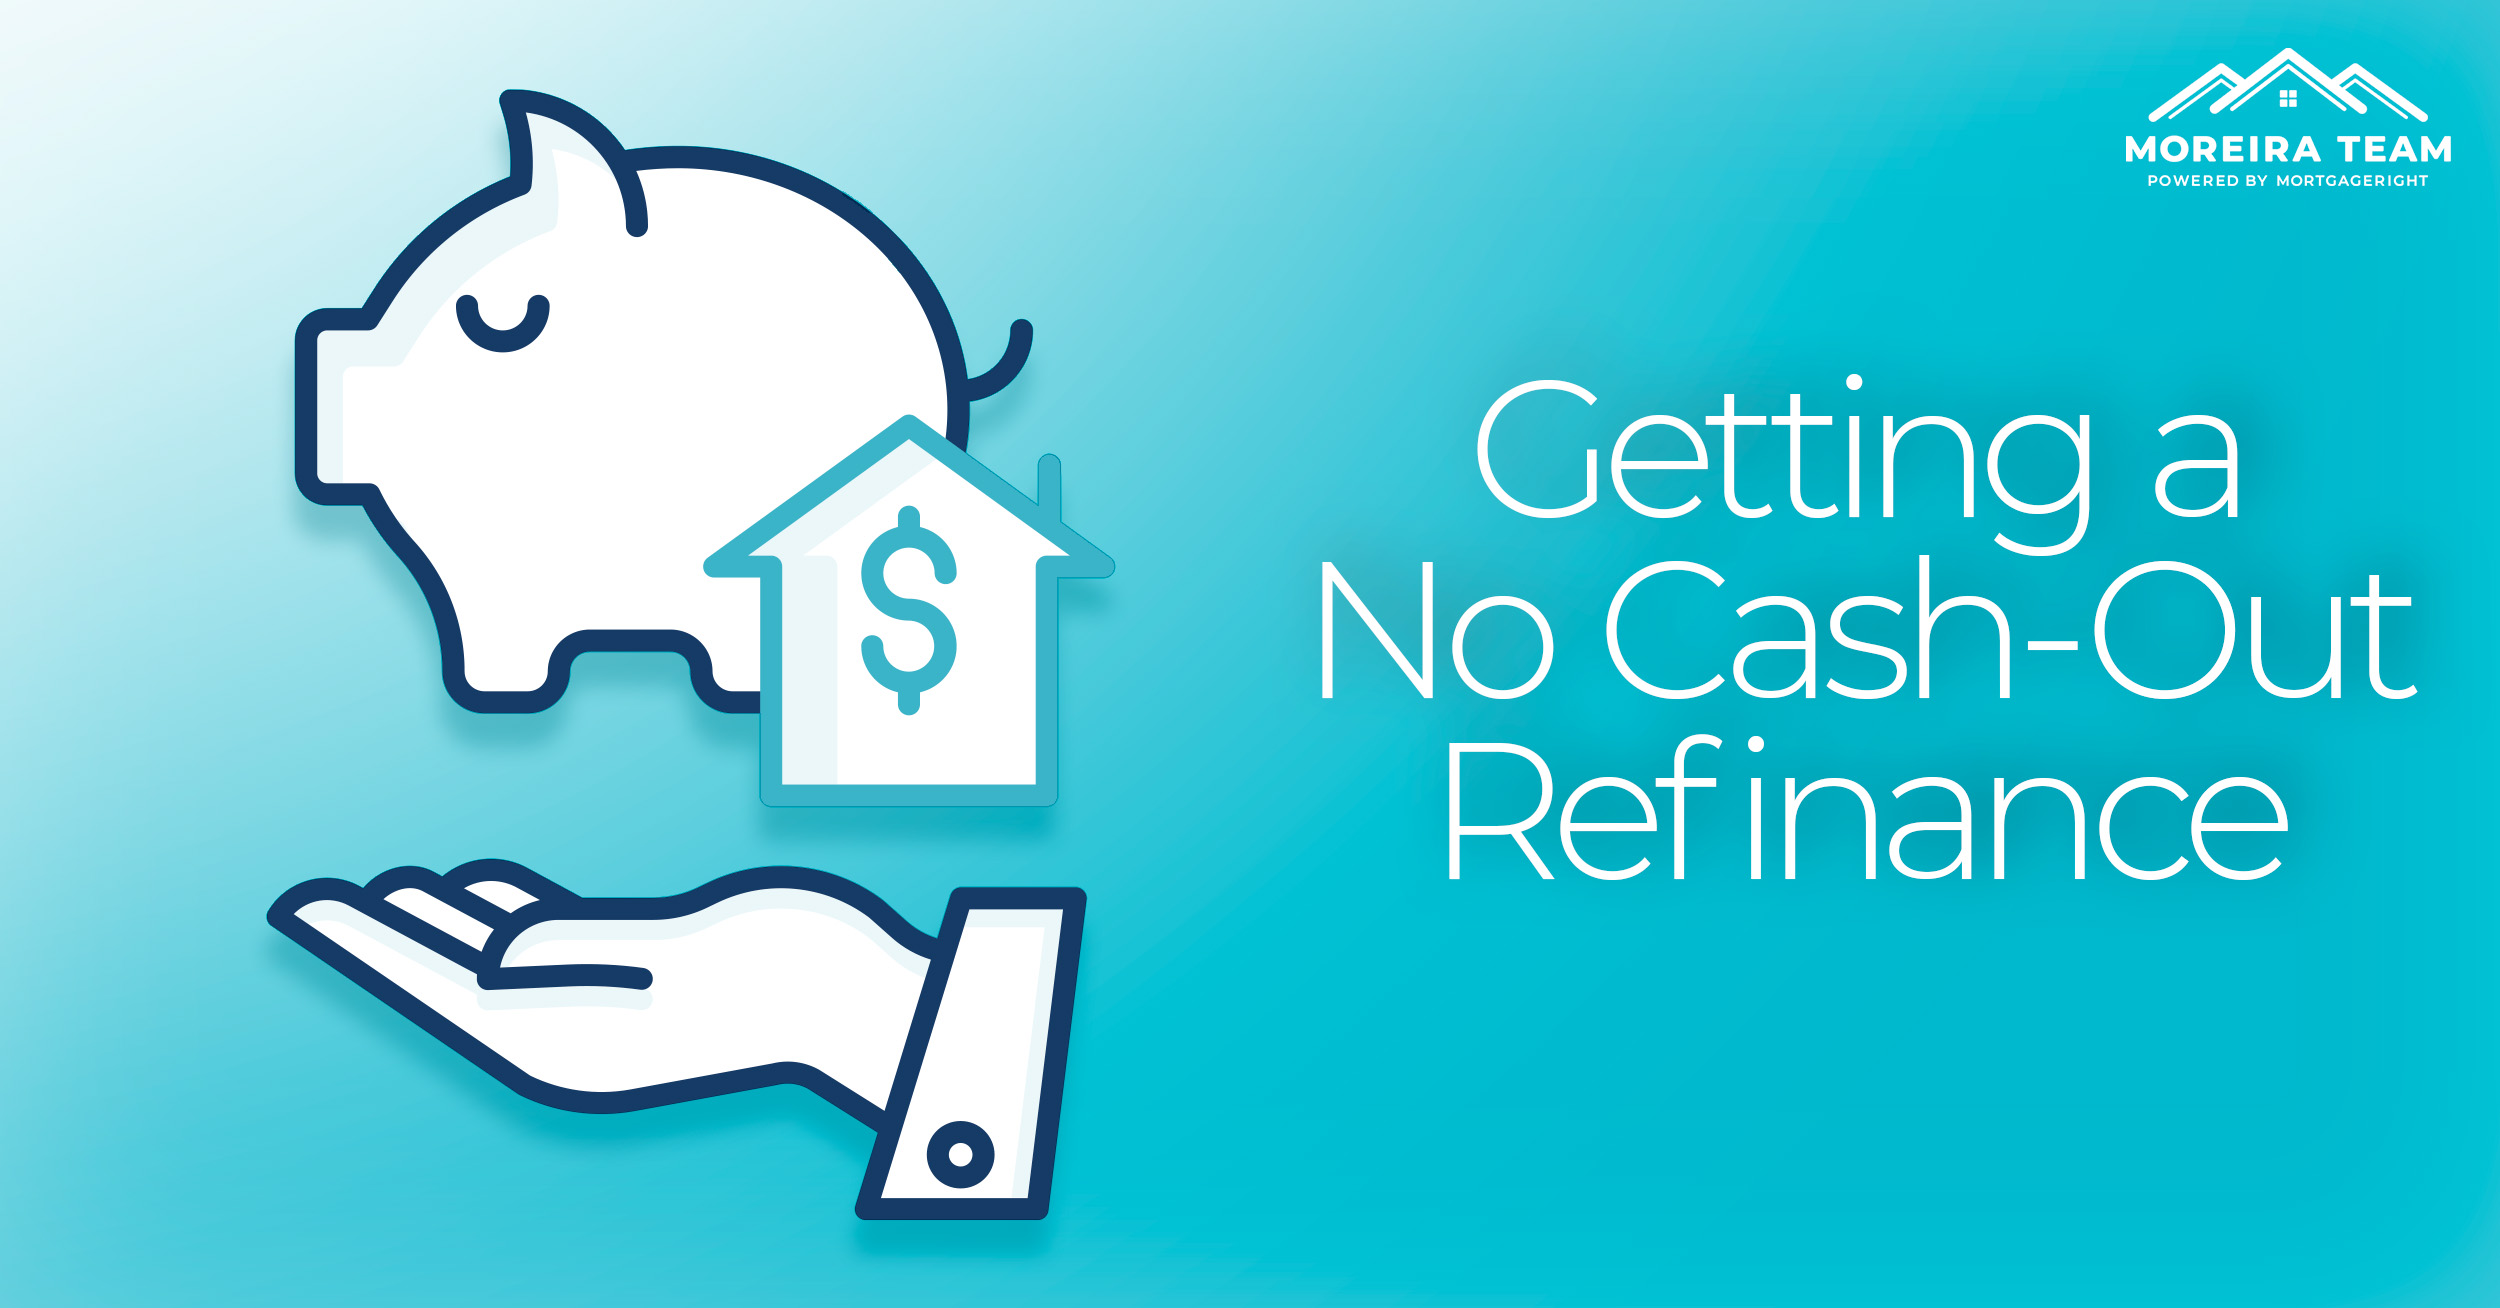 Getting a No-Cash-Out Refinance